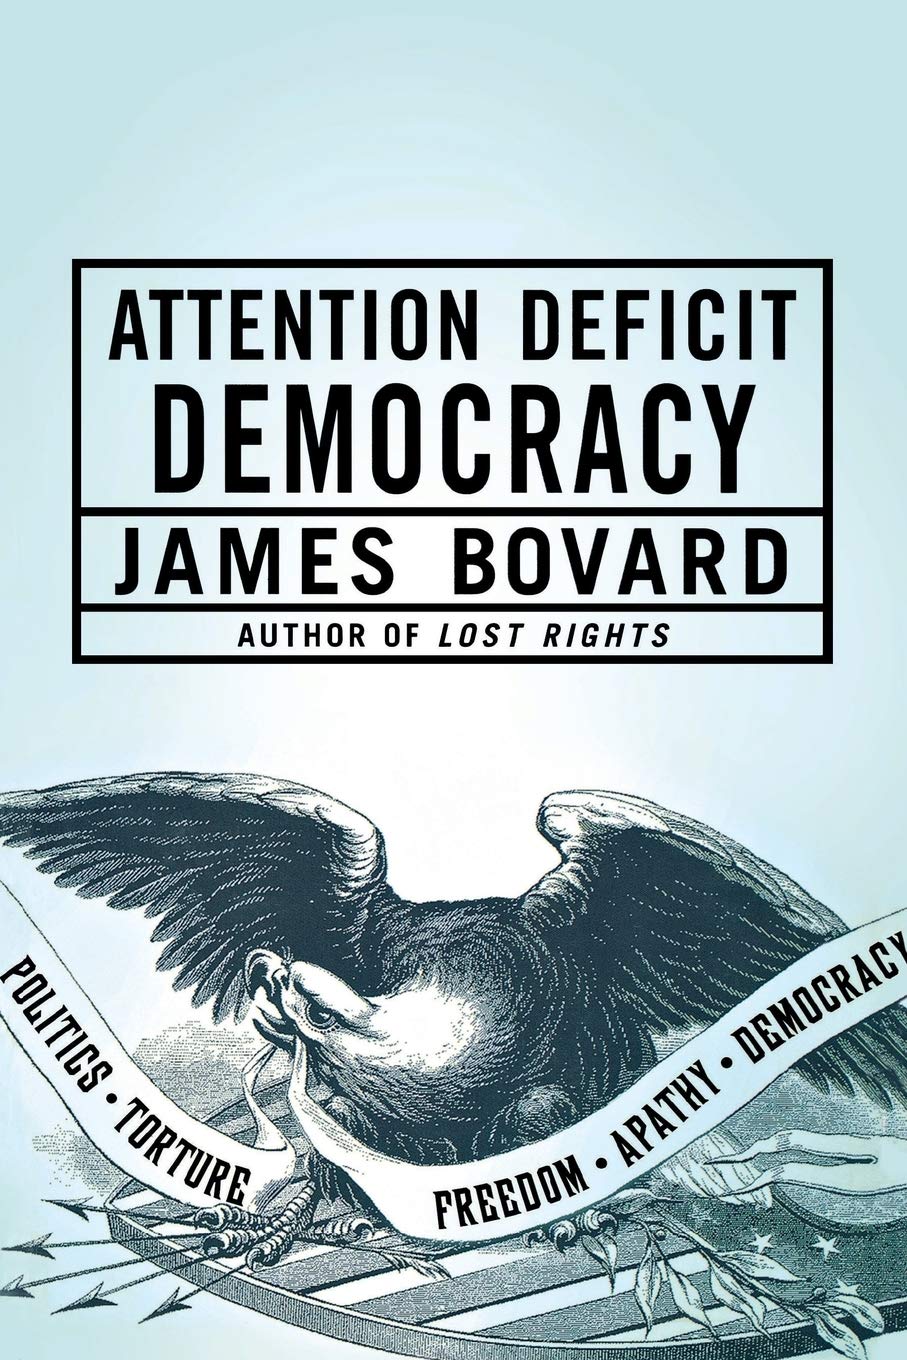 Buy Now: Attention Deficit Democracy, book